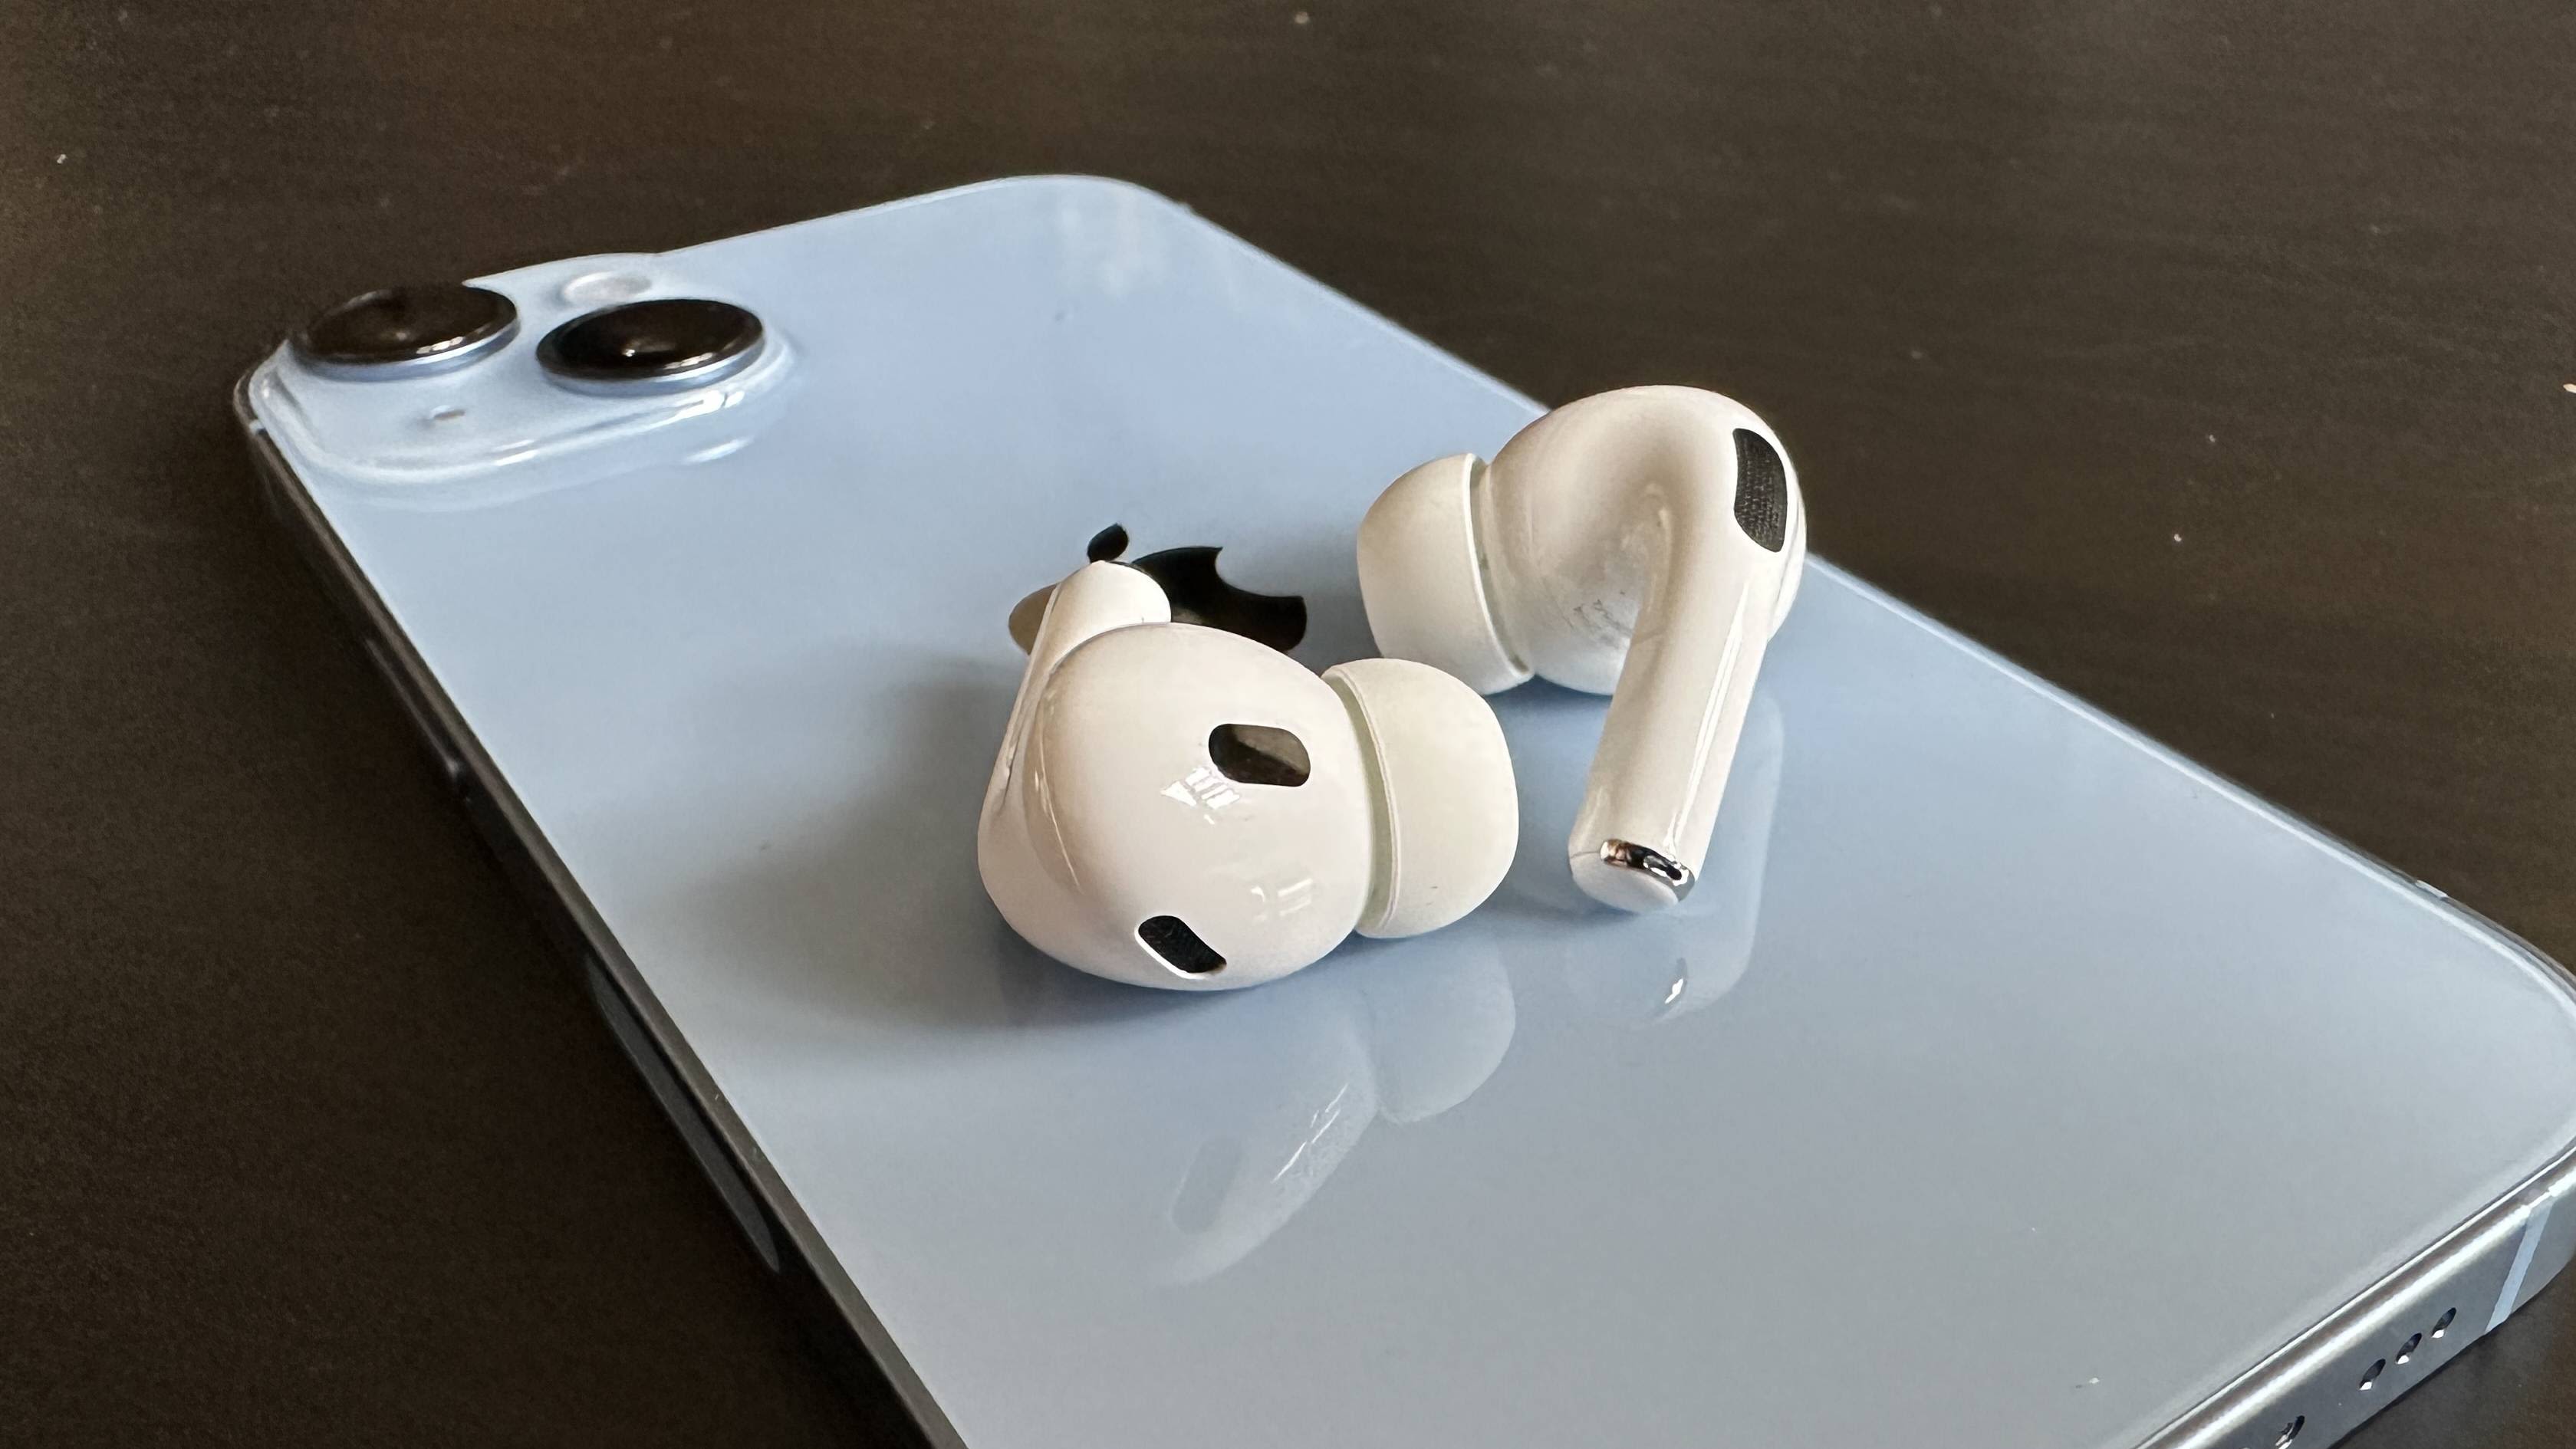 Apple AirPods Pro review (2nd-gen): Big improvements, all on the inside